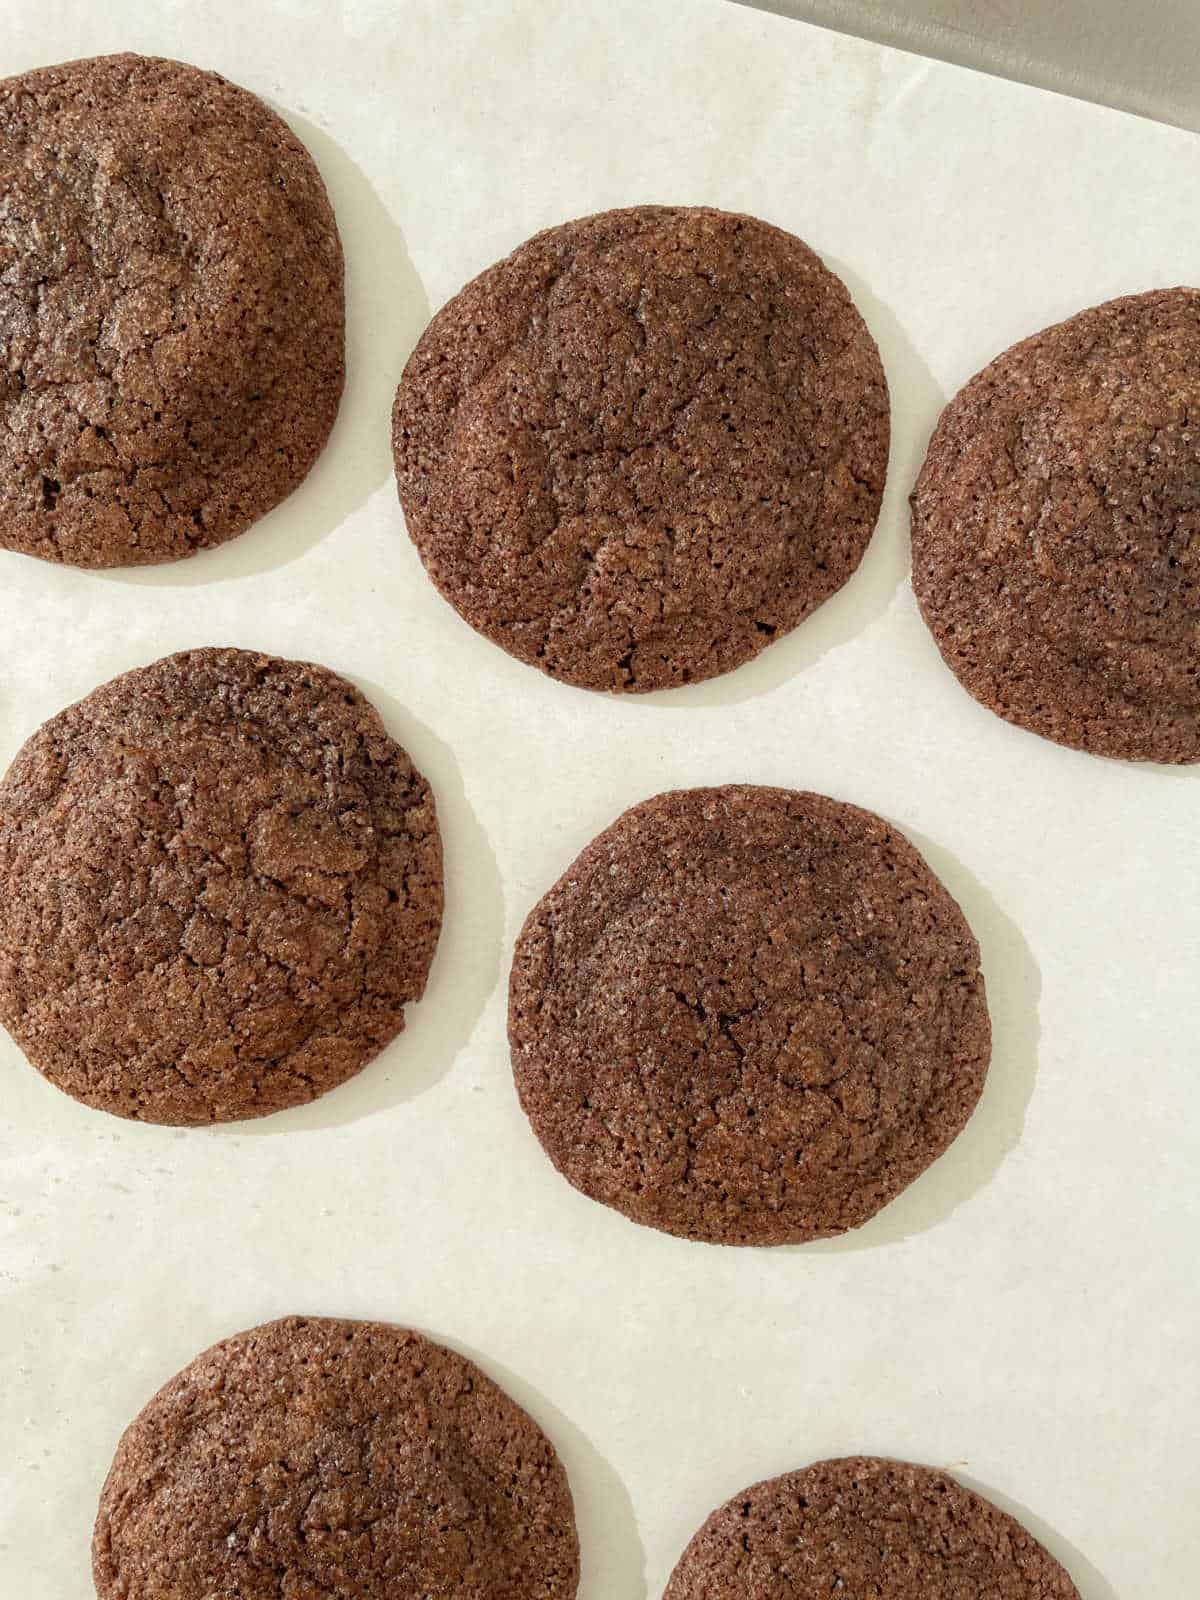 Baked chocolate snickerdoodles on white parchment paper.